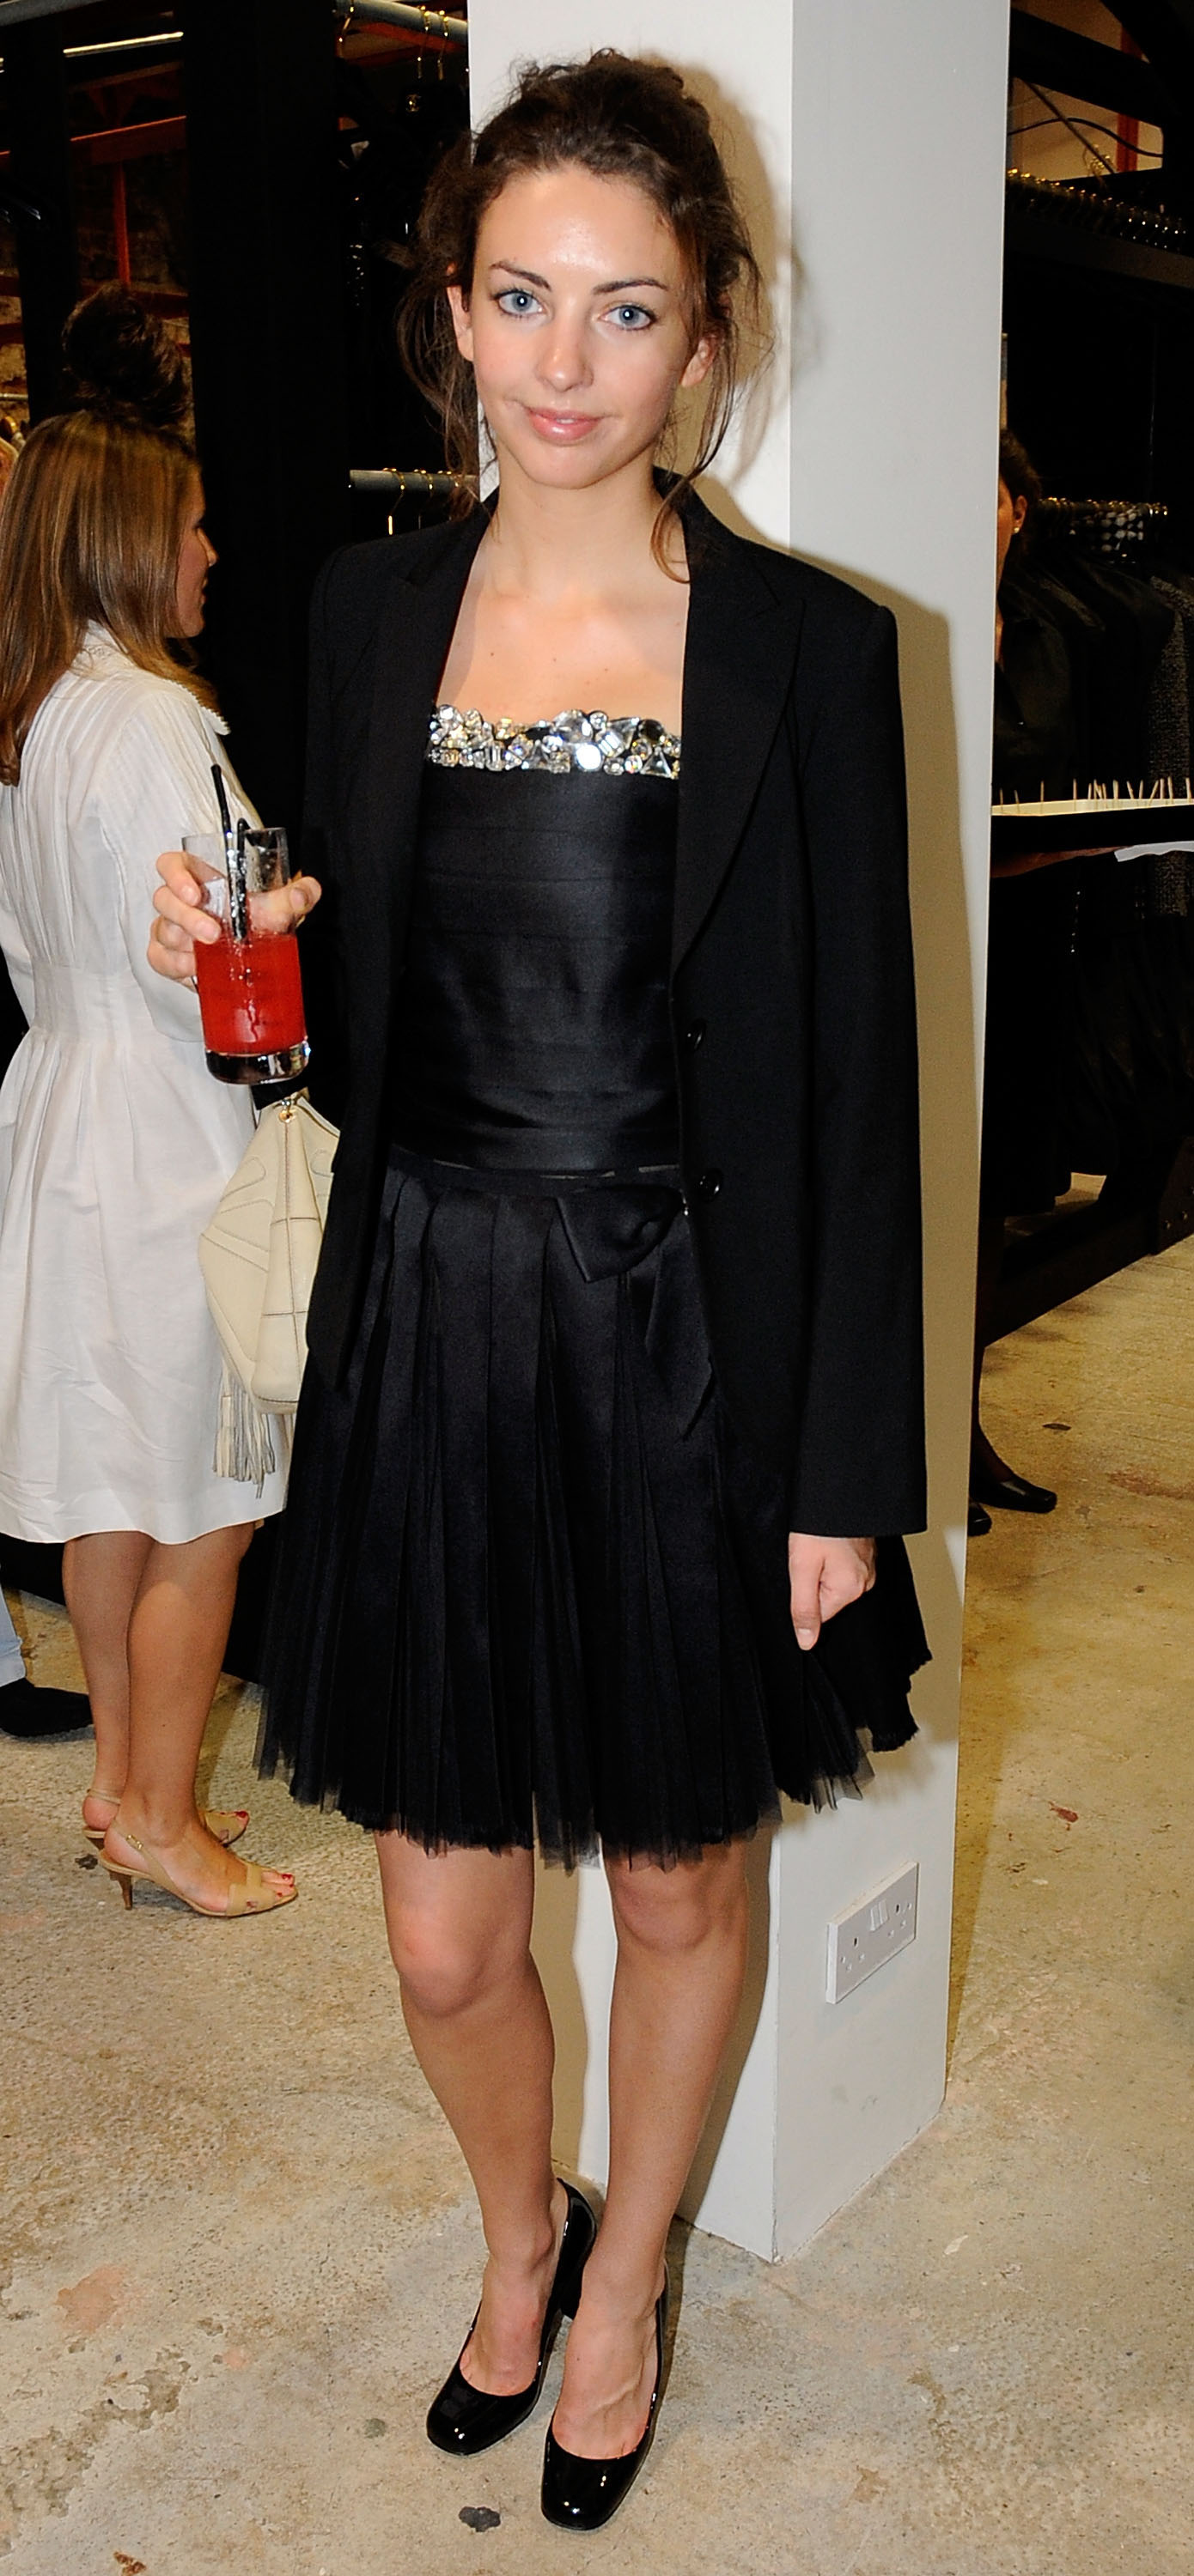 Rose Hanbury attends the Chanel Paris-Londres Party At Dover Street Market in London, England, on June 10, 2008. | Source: Getty Images